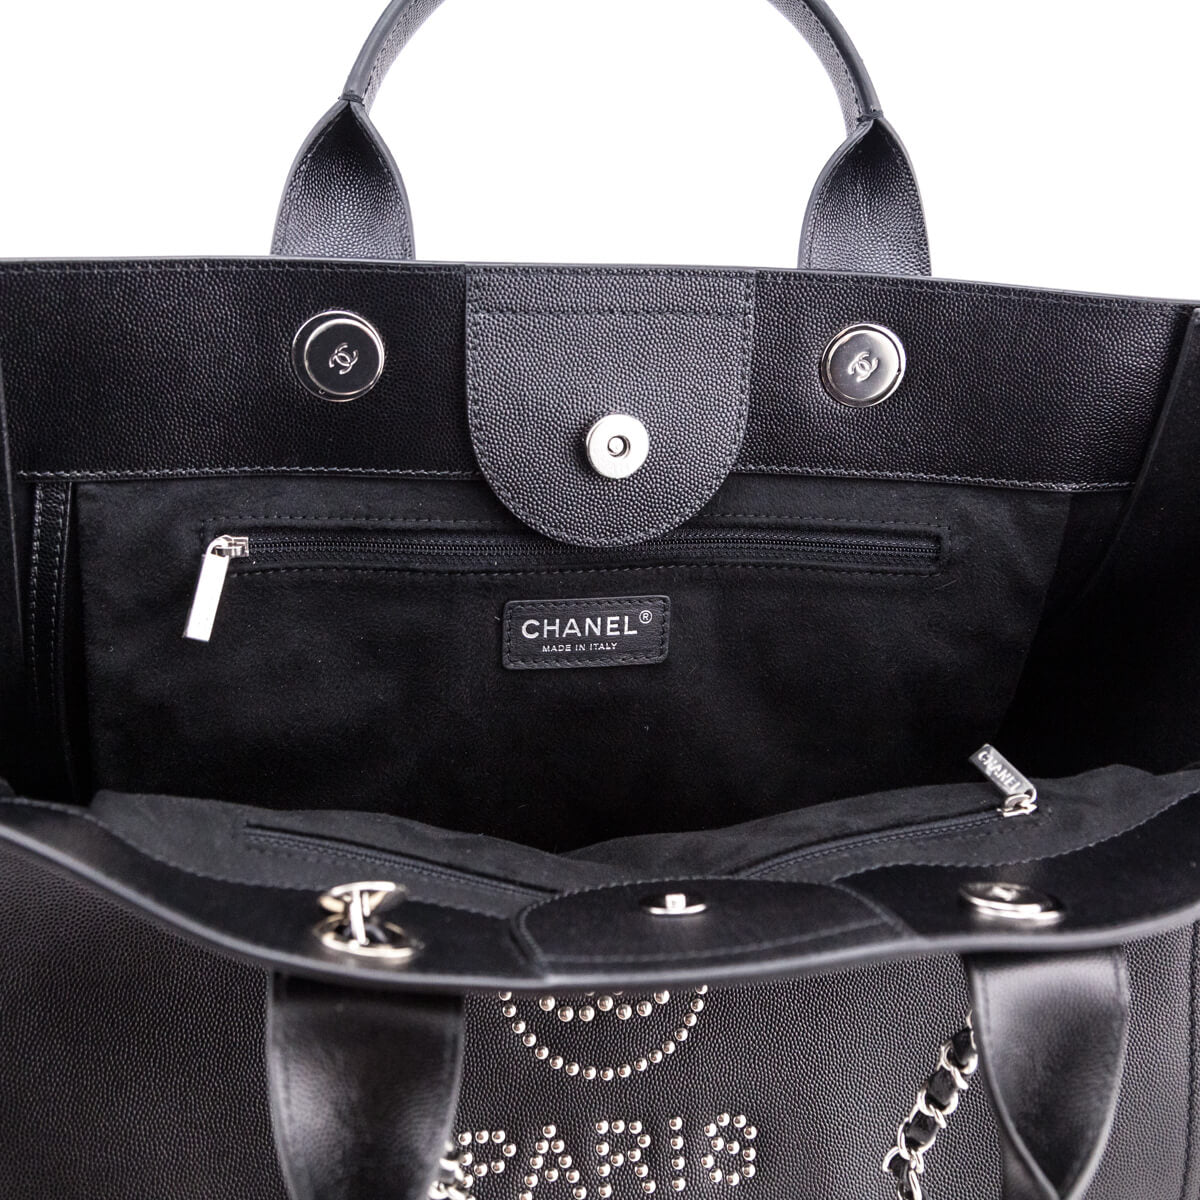 Chanel Black Grained Calfskin Large Deauville Tote SHW – Love that